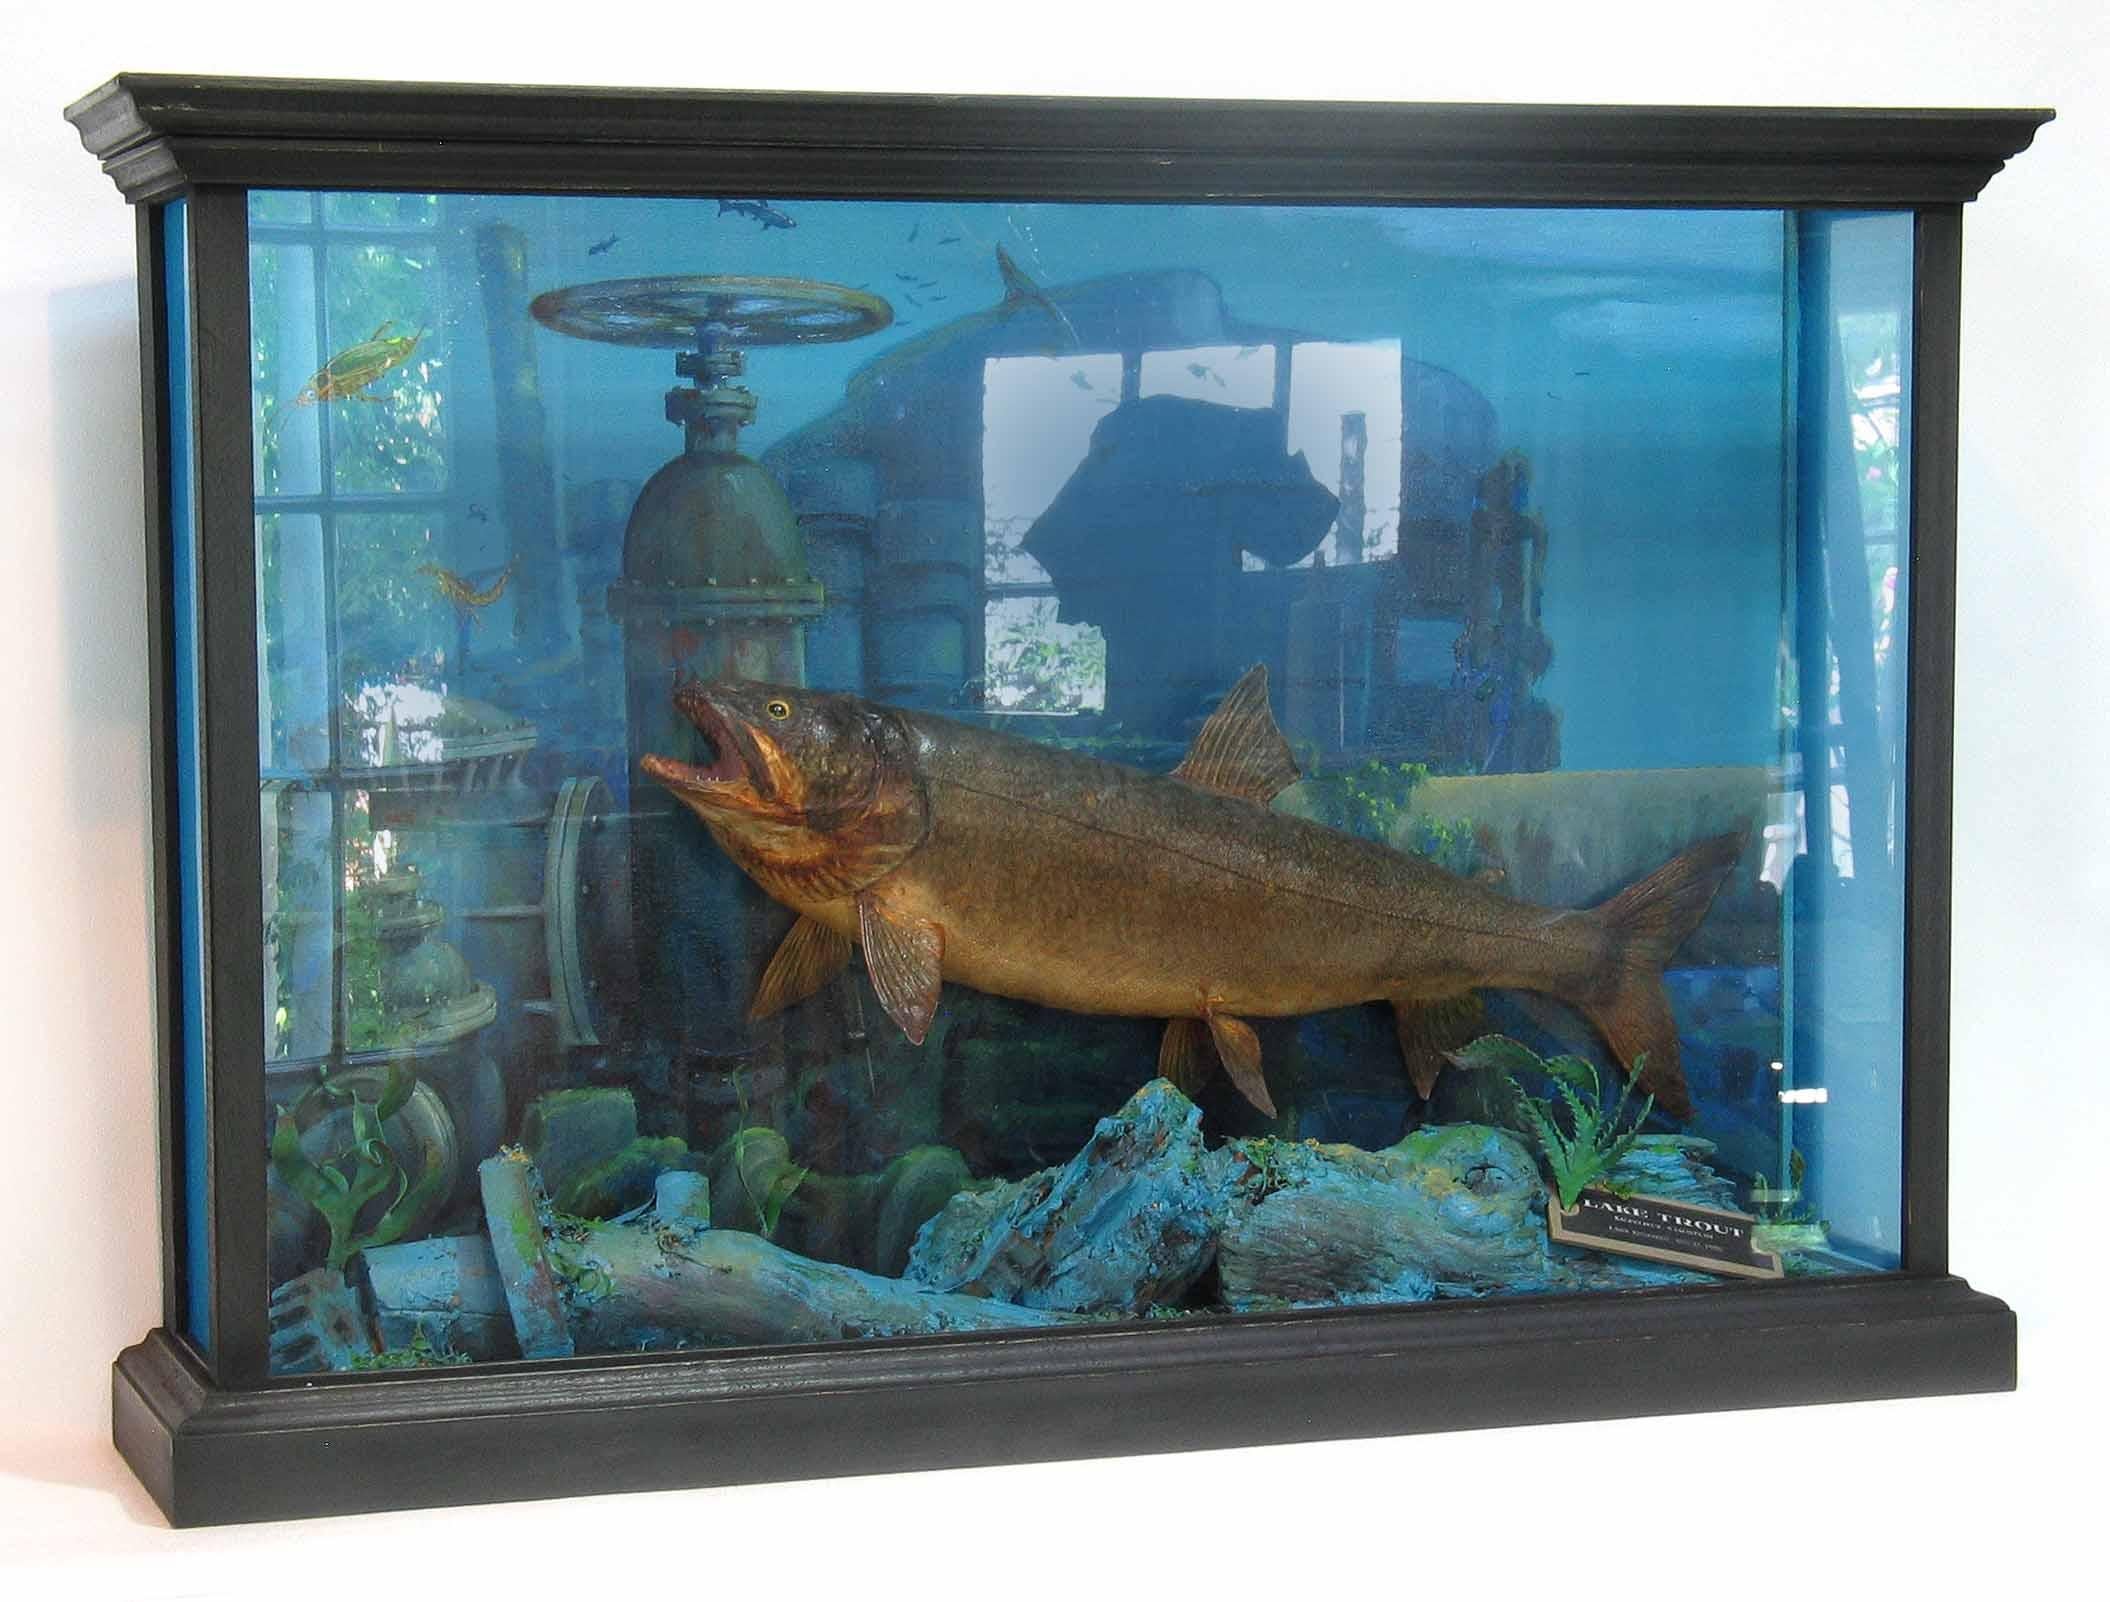 Canadian Unusual Fish Taxidermy Diorama Set in Decaying Underwater Industrial Environment